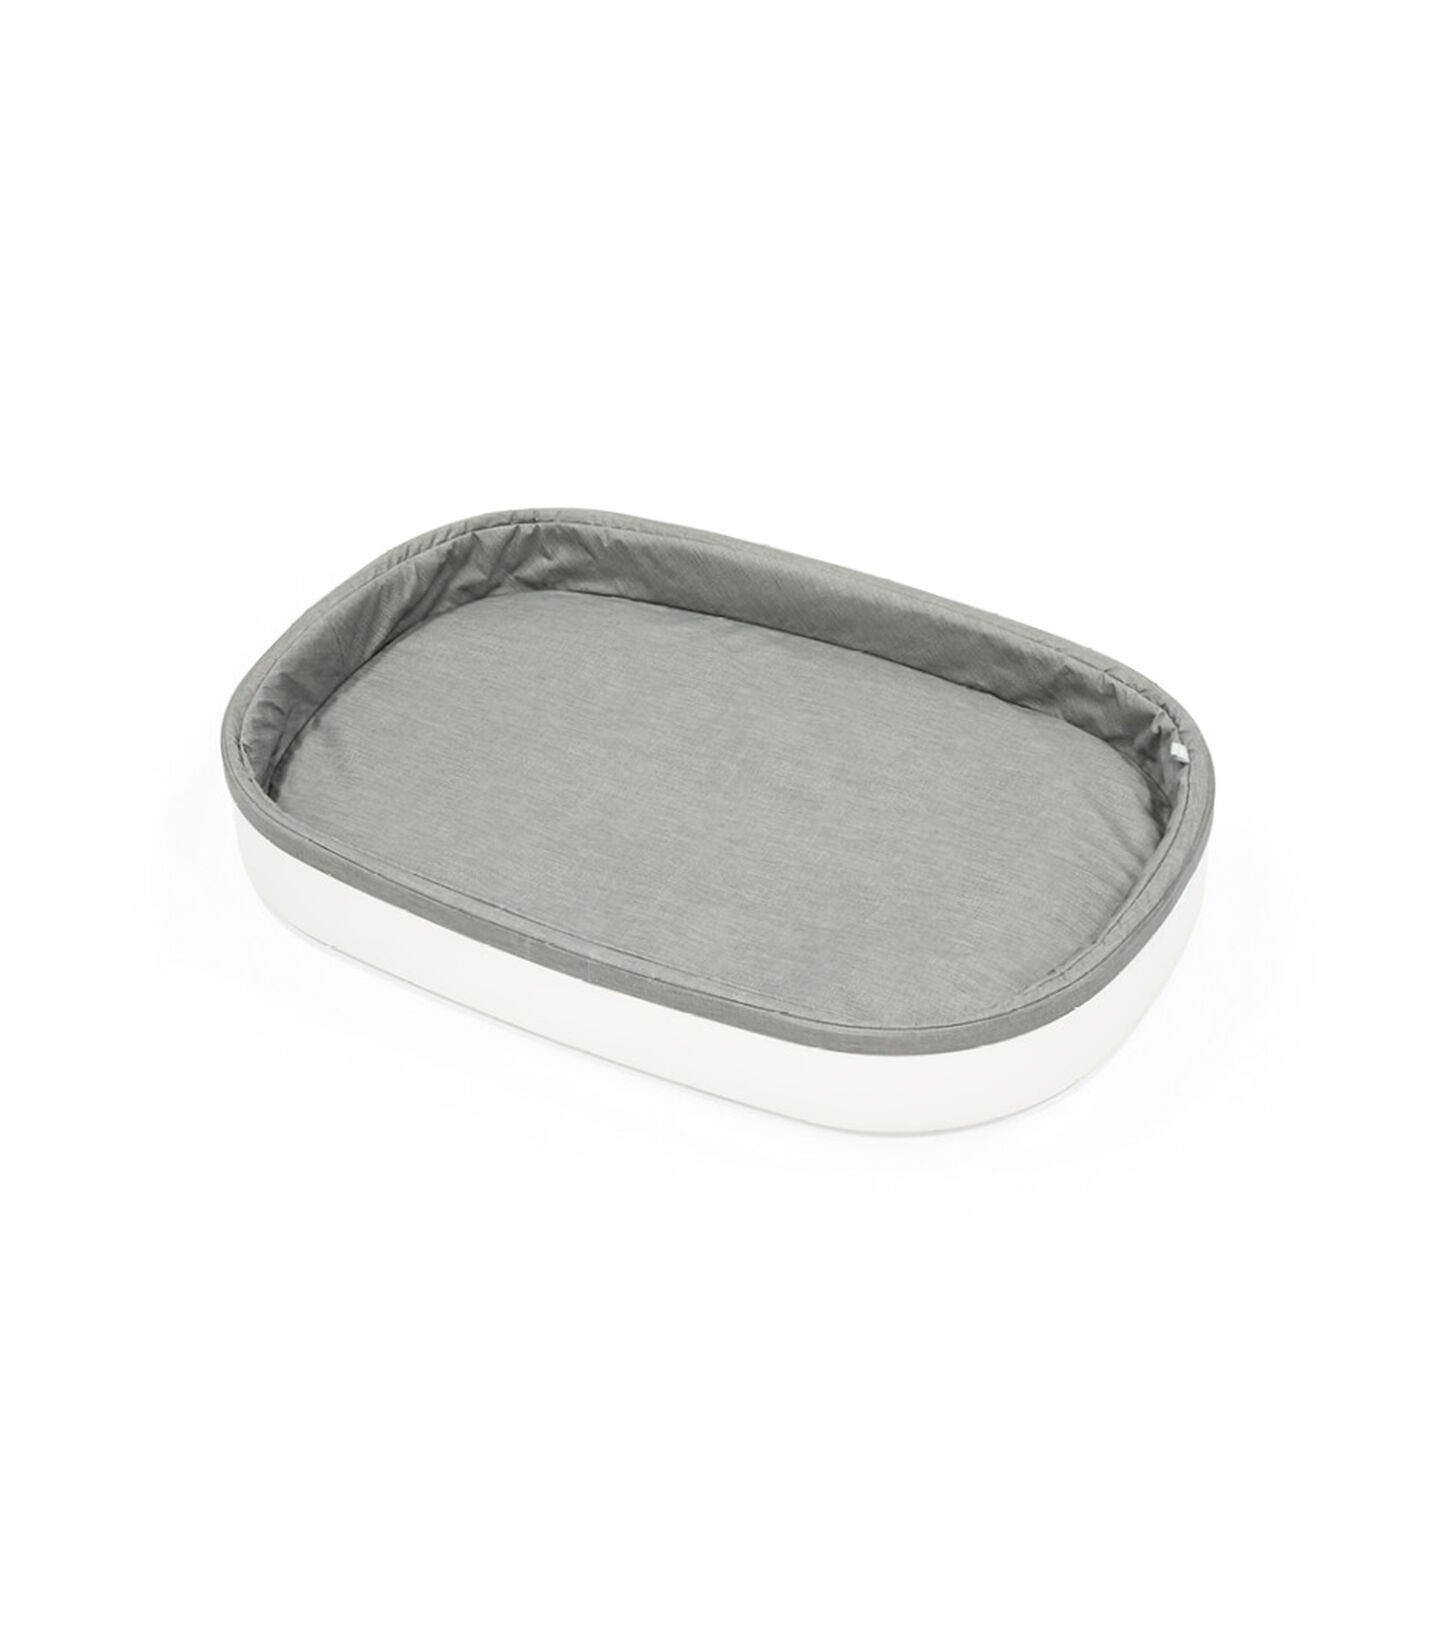 Stokke® Sleepi™ Changer and Changing Pad, Grey. view 1